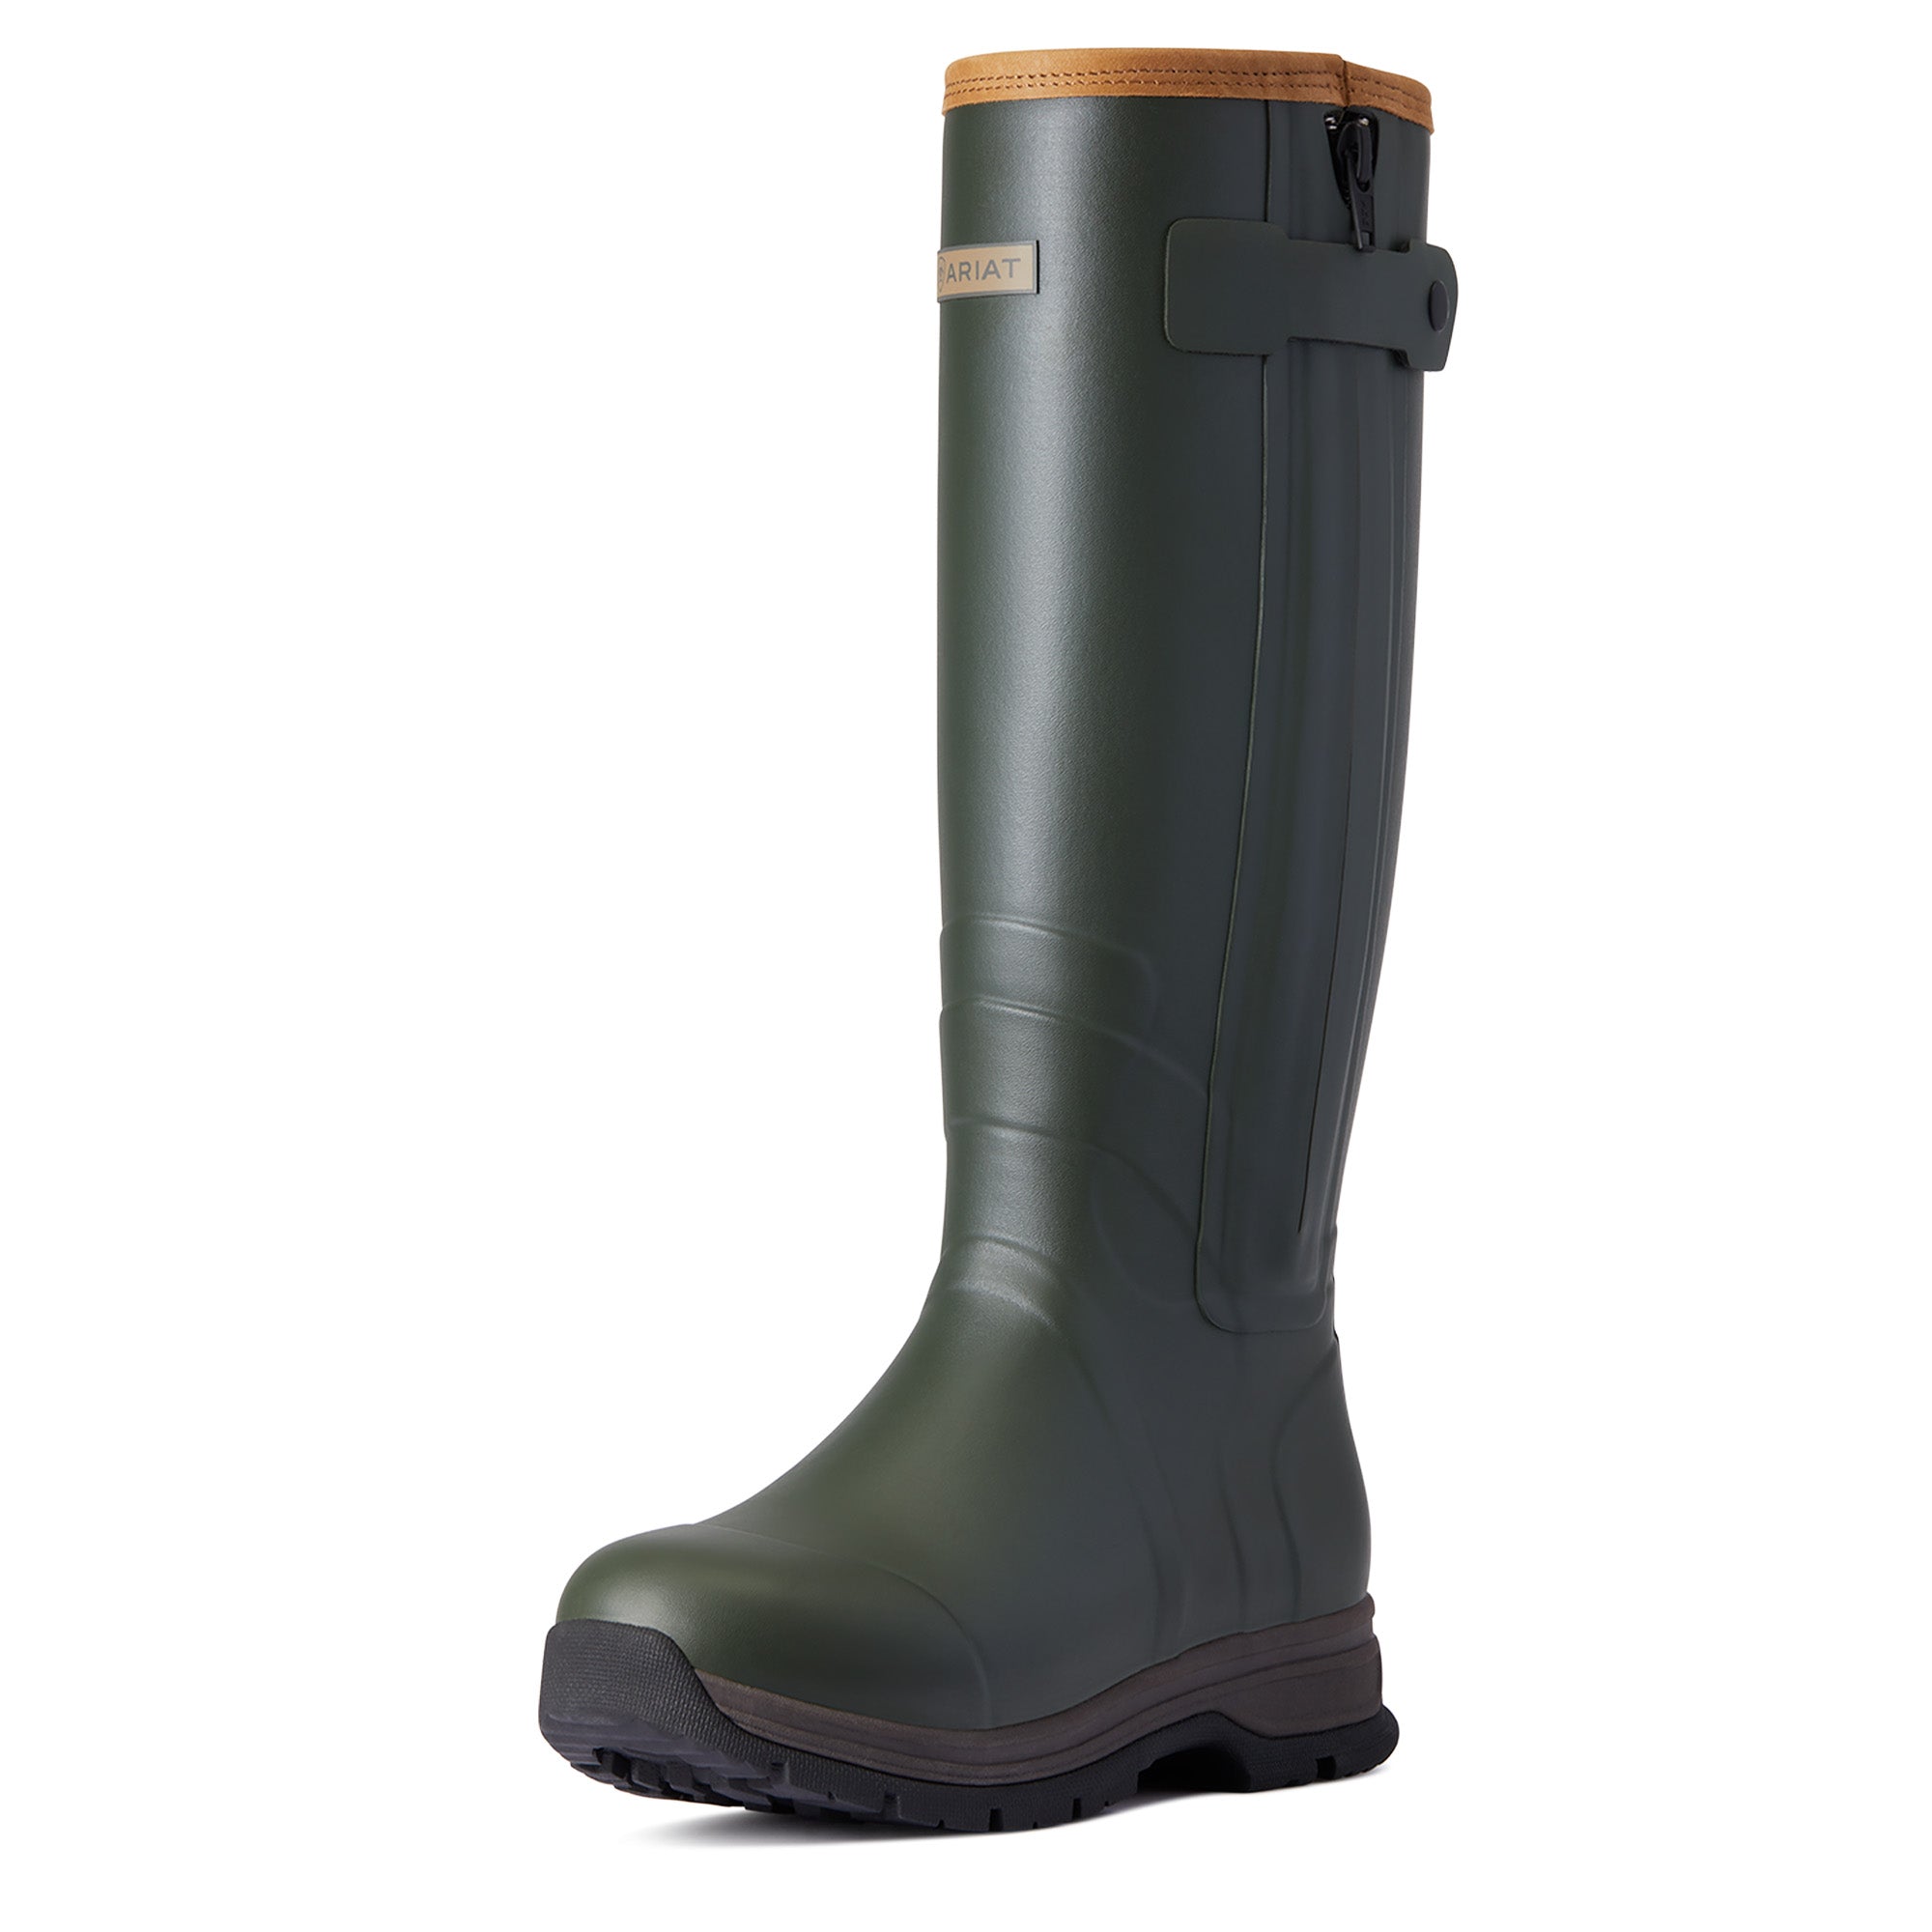 Winter Gummistiefel WMS Burford Insulated Zip Rubber Boot olive | 10038503